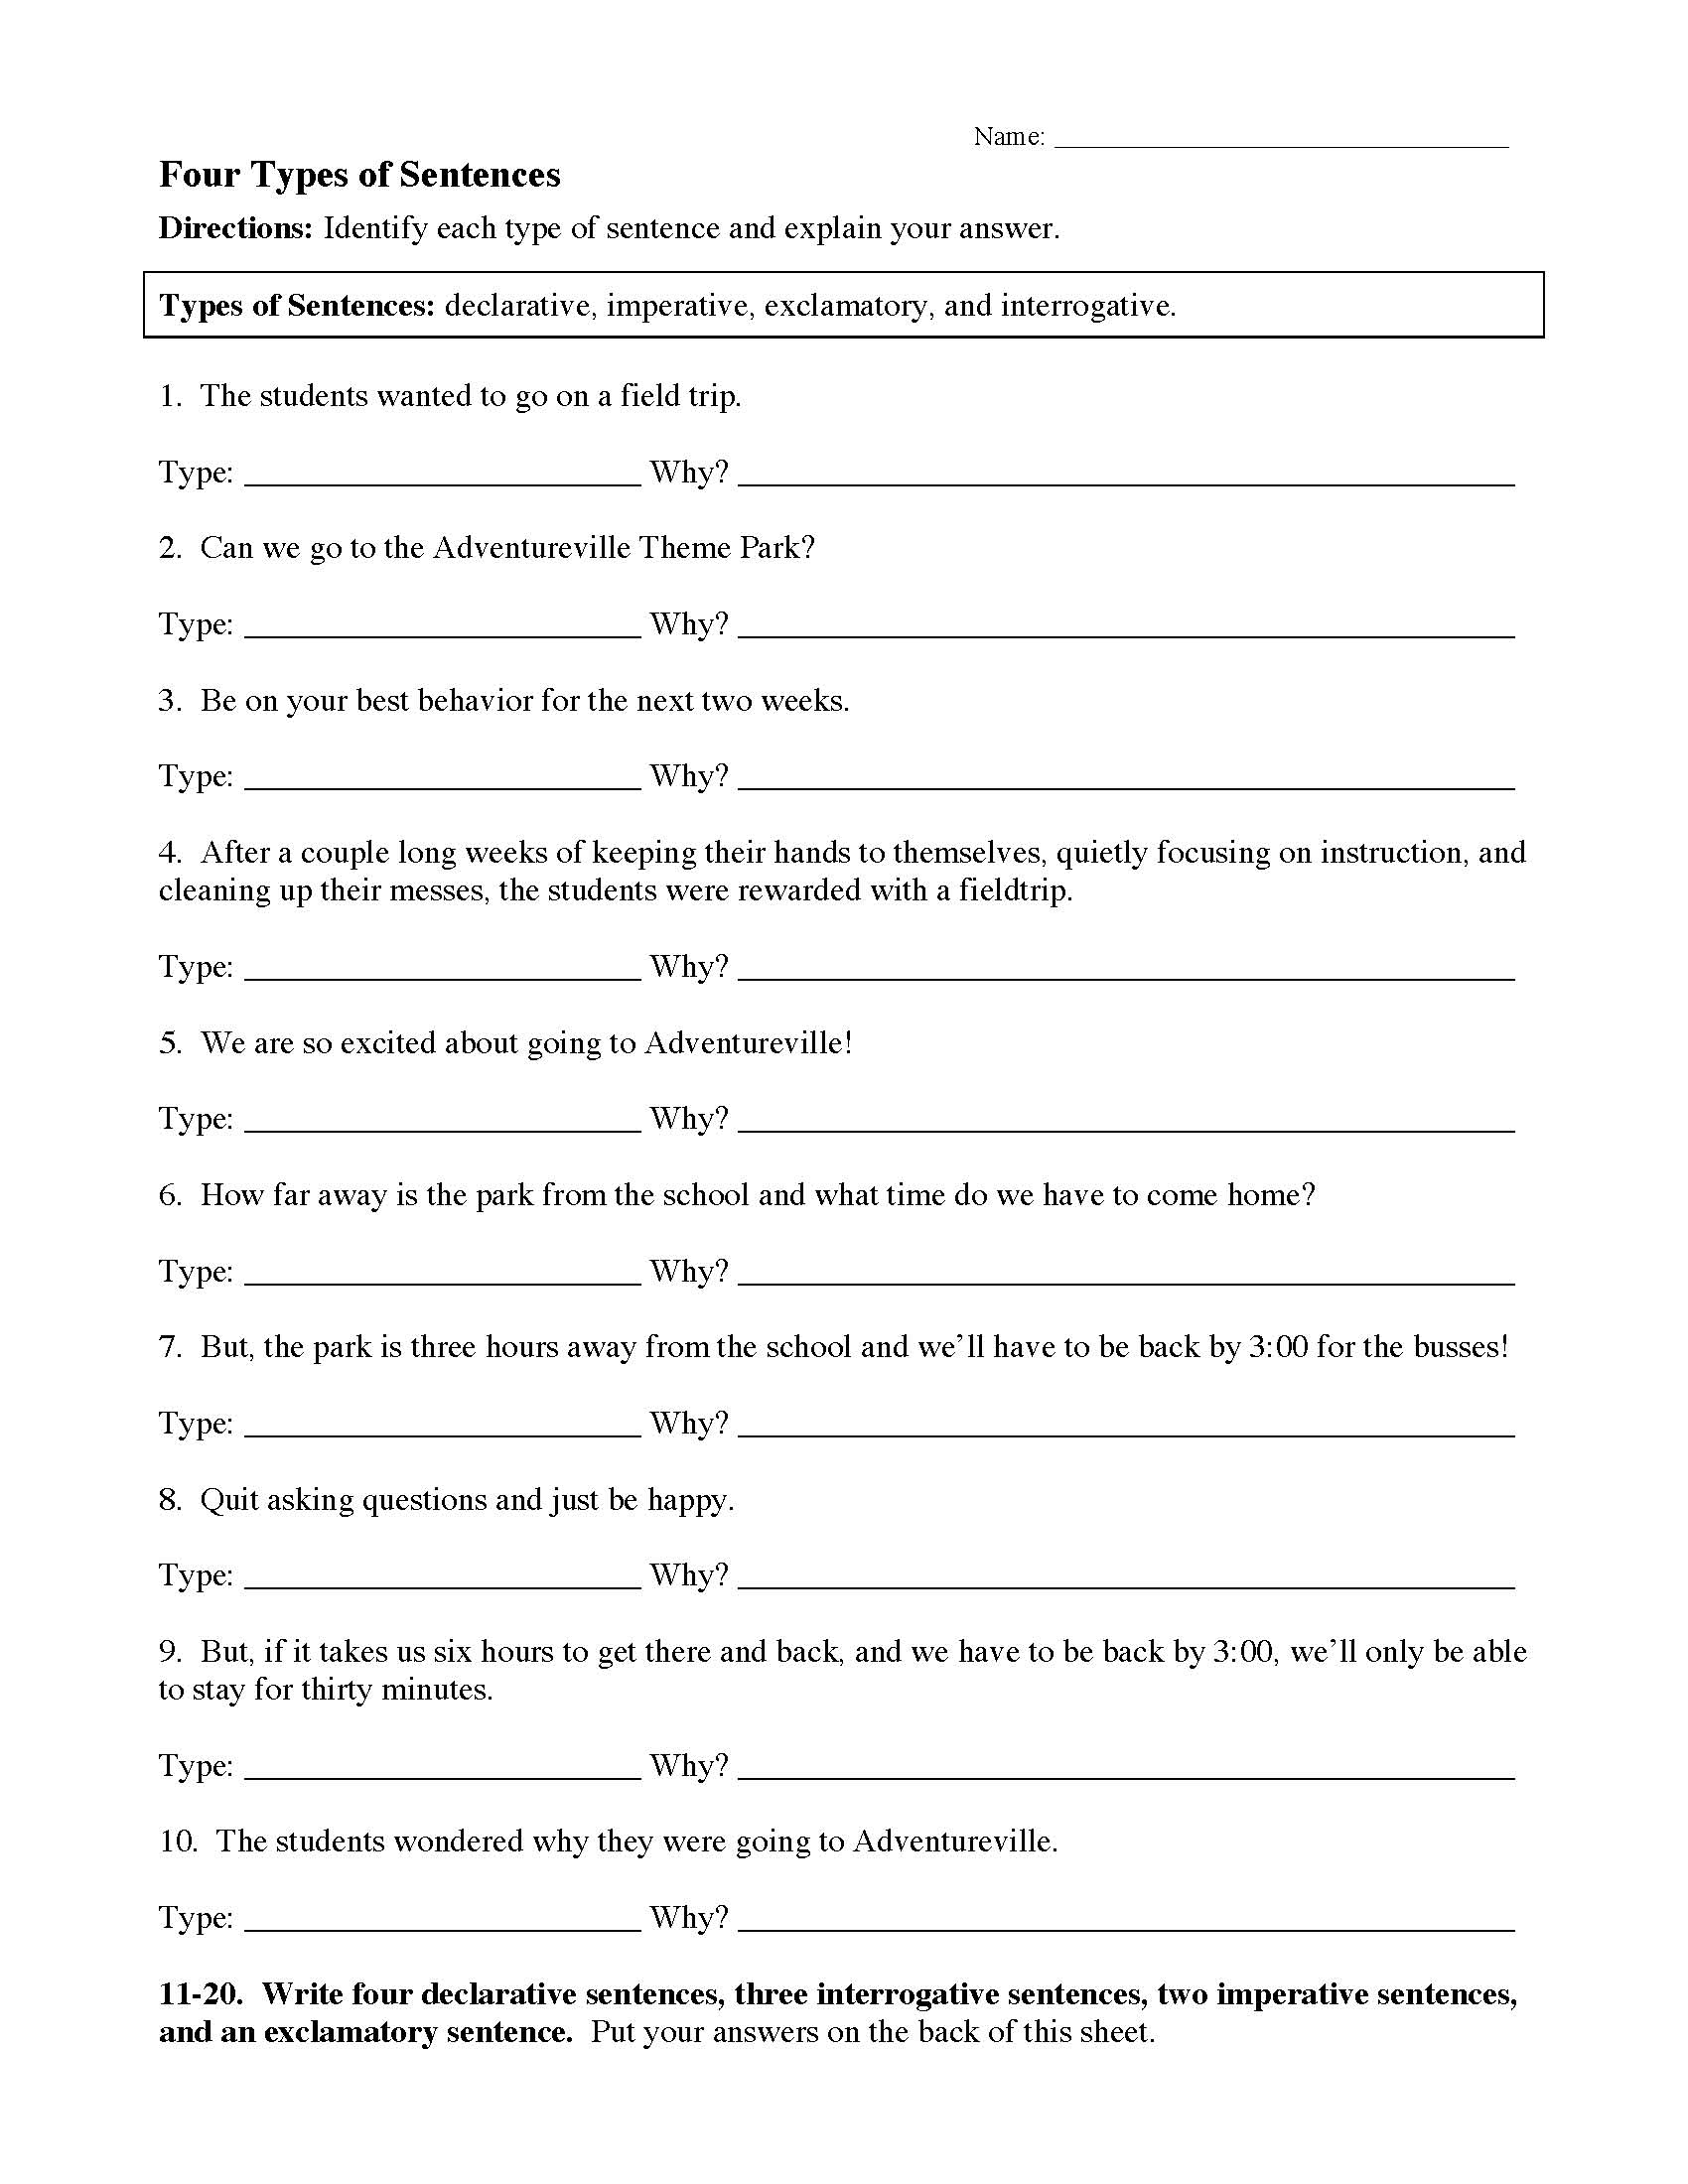 This is a preview image of Four Types of Sentences Worksheet. Click on it to enlarge it or view the source file.